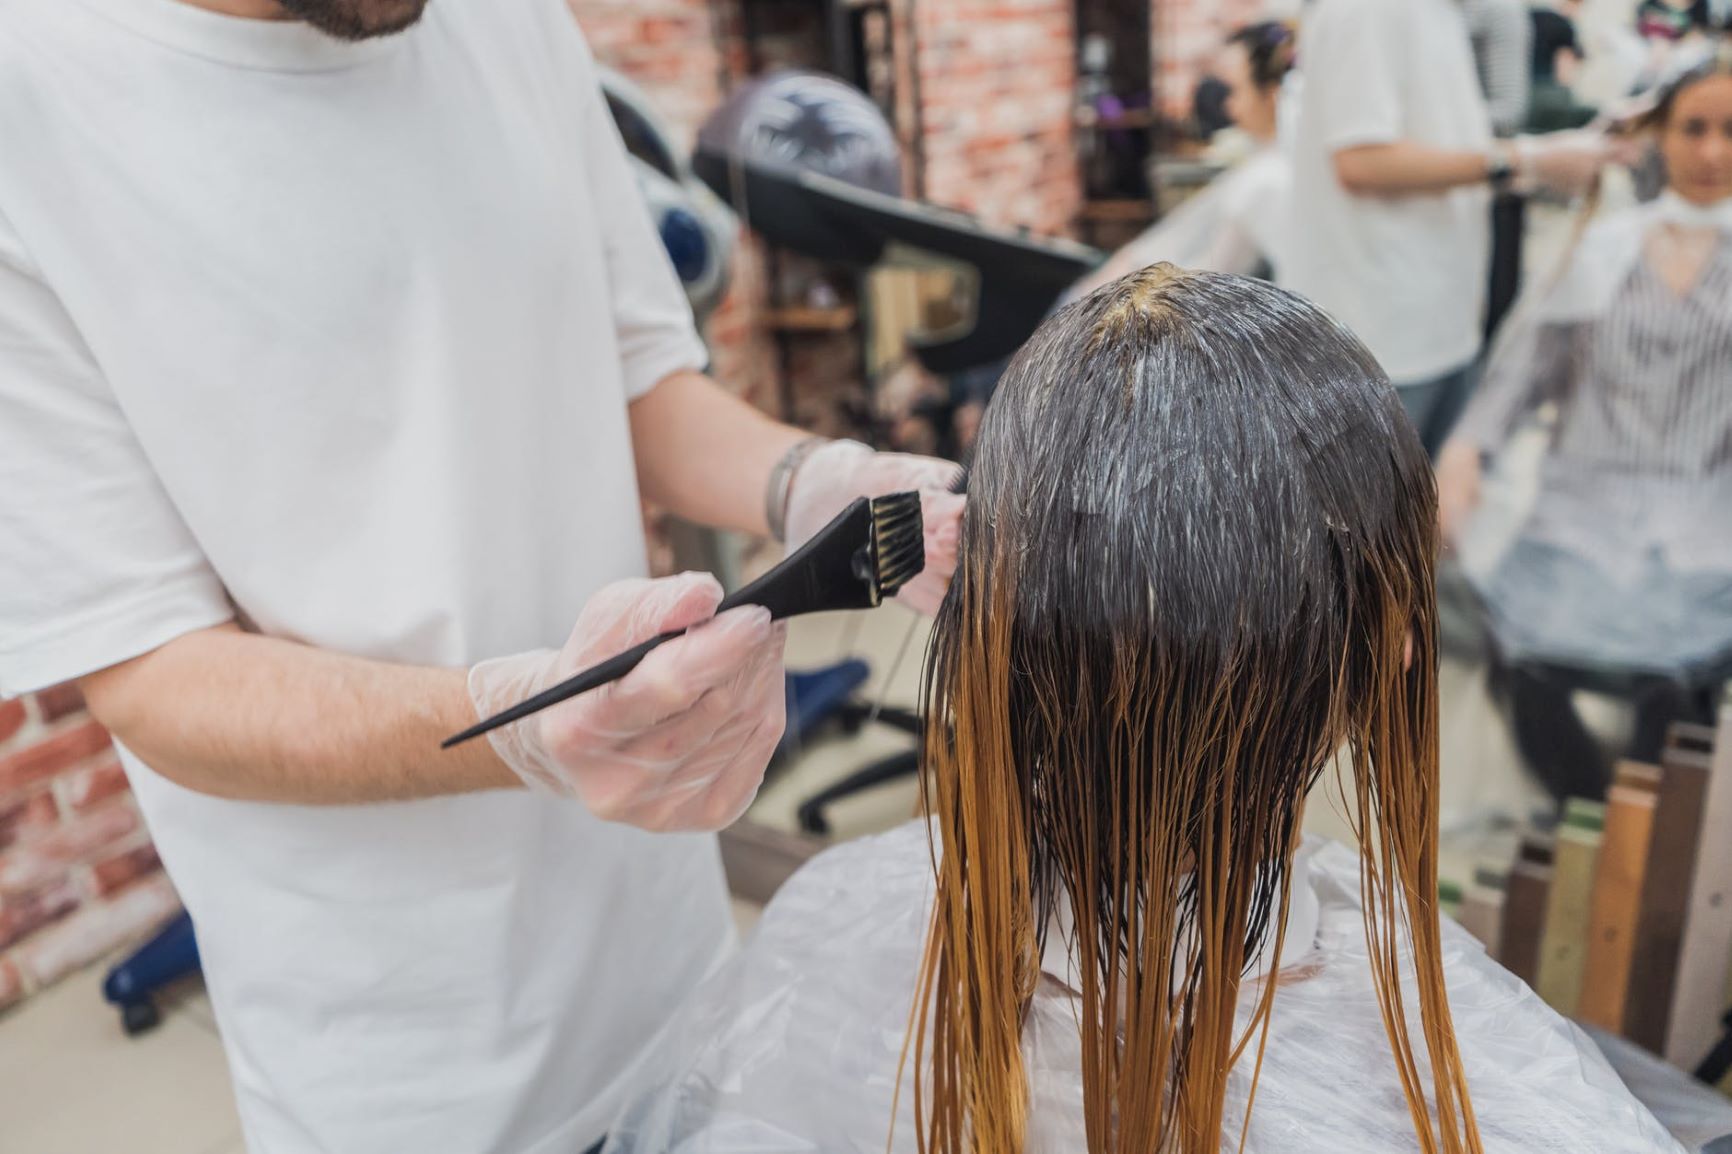 What are the Health Risks of Hair Dye and Bleach? - Future Science Leaders